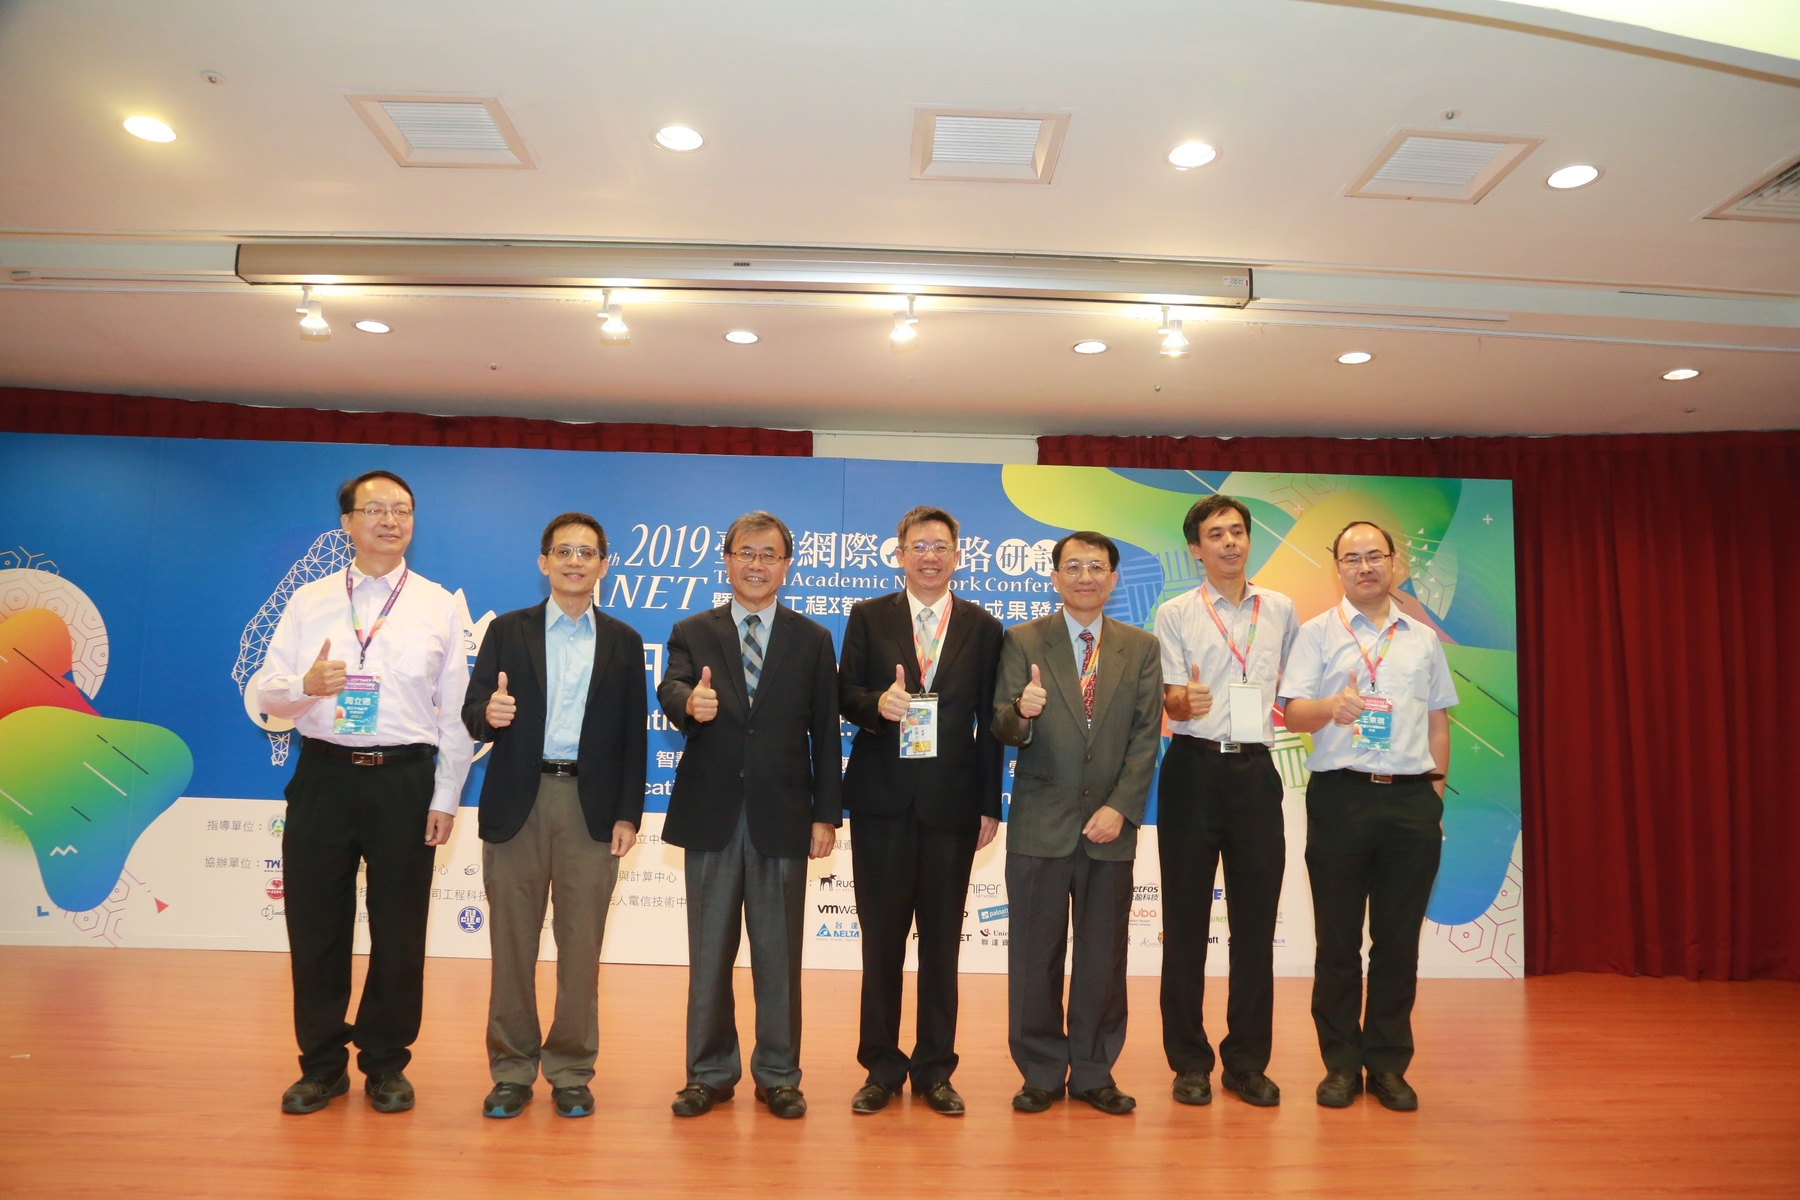 Among other scholars, Taiwan Academic Network Conference 2019 invited Bor-Chen Kuo, PhD (fourth from the left) – Director of the Department of Information and Technology Education, Ministry of Education; prof. Yu-Chee Tseng, National Chiao-Tung University (second from the left) to give keynote speeches. Third from the left is NSYSU President Ying-Yao Cheng and third from the right is Wei-Kuang Lai – professor at NSYSU Department of Computer Science and Engineering and President of the Office of Library and Information Services.